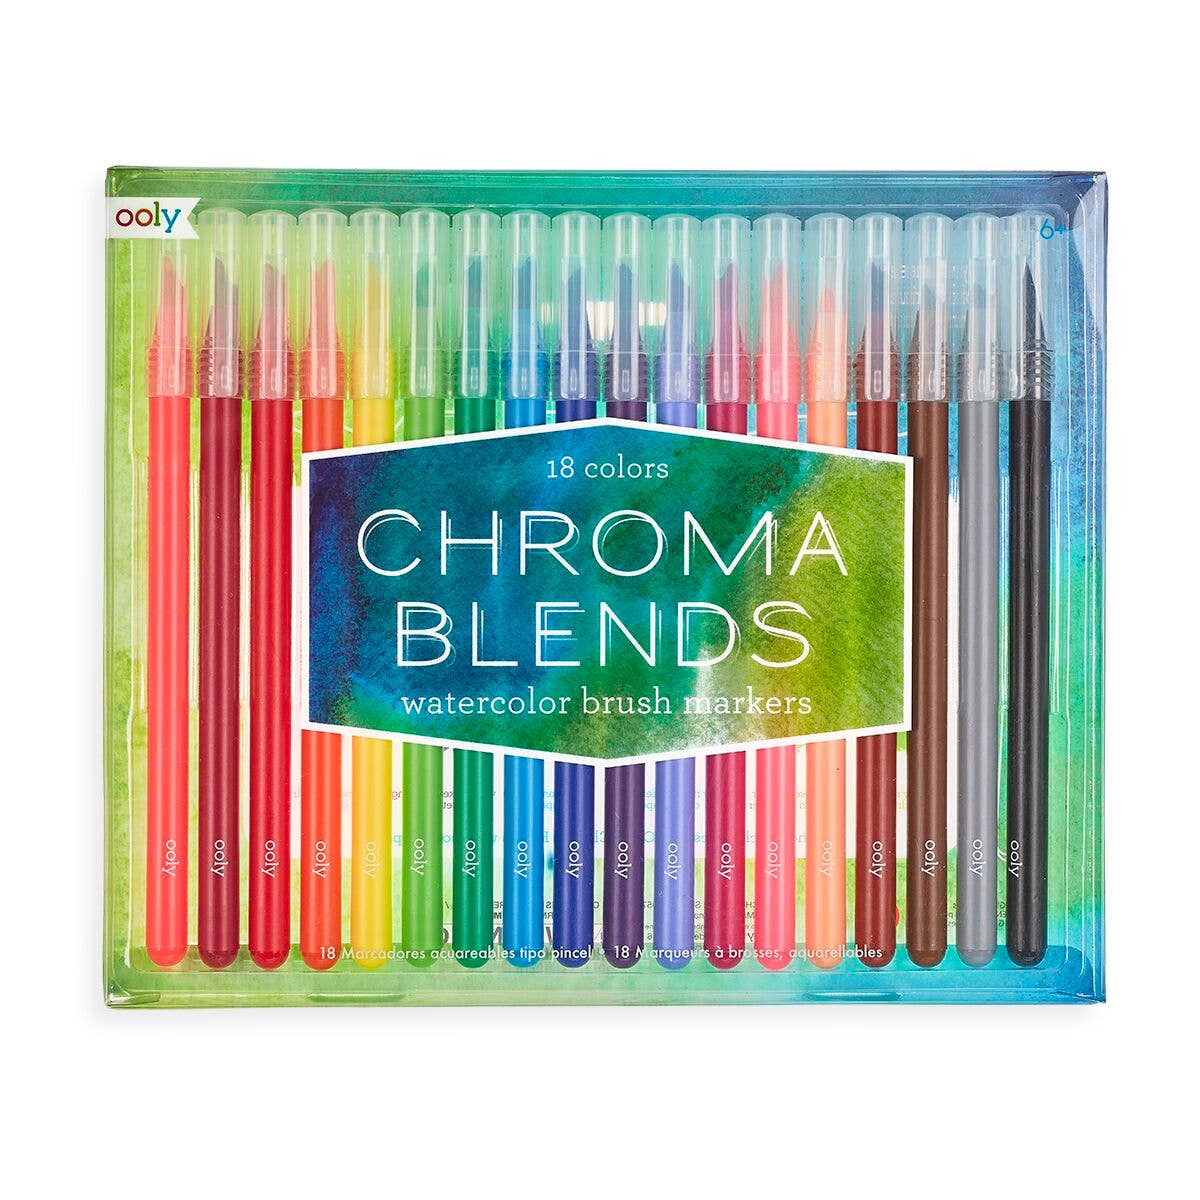 Chroma Blends: Watercolor Brush Markers